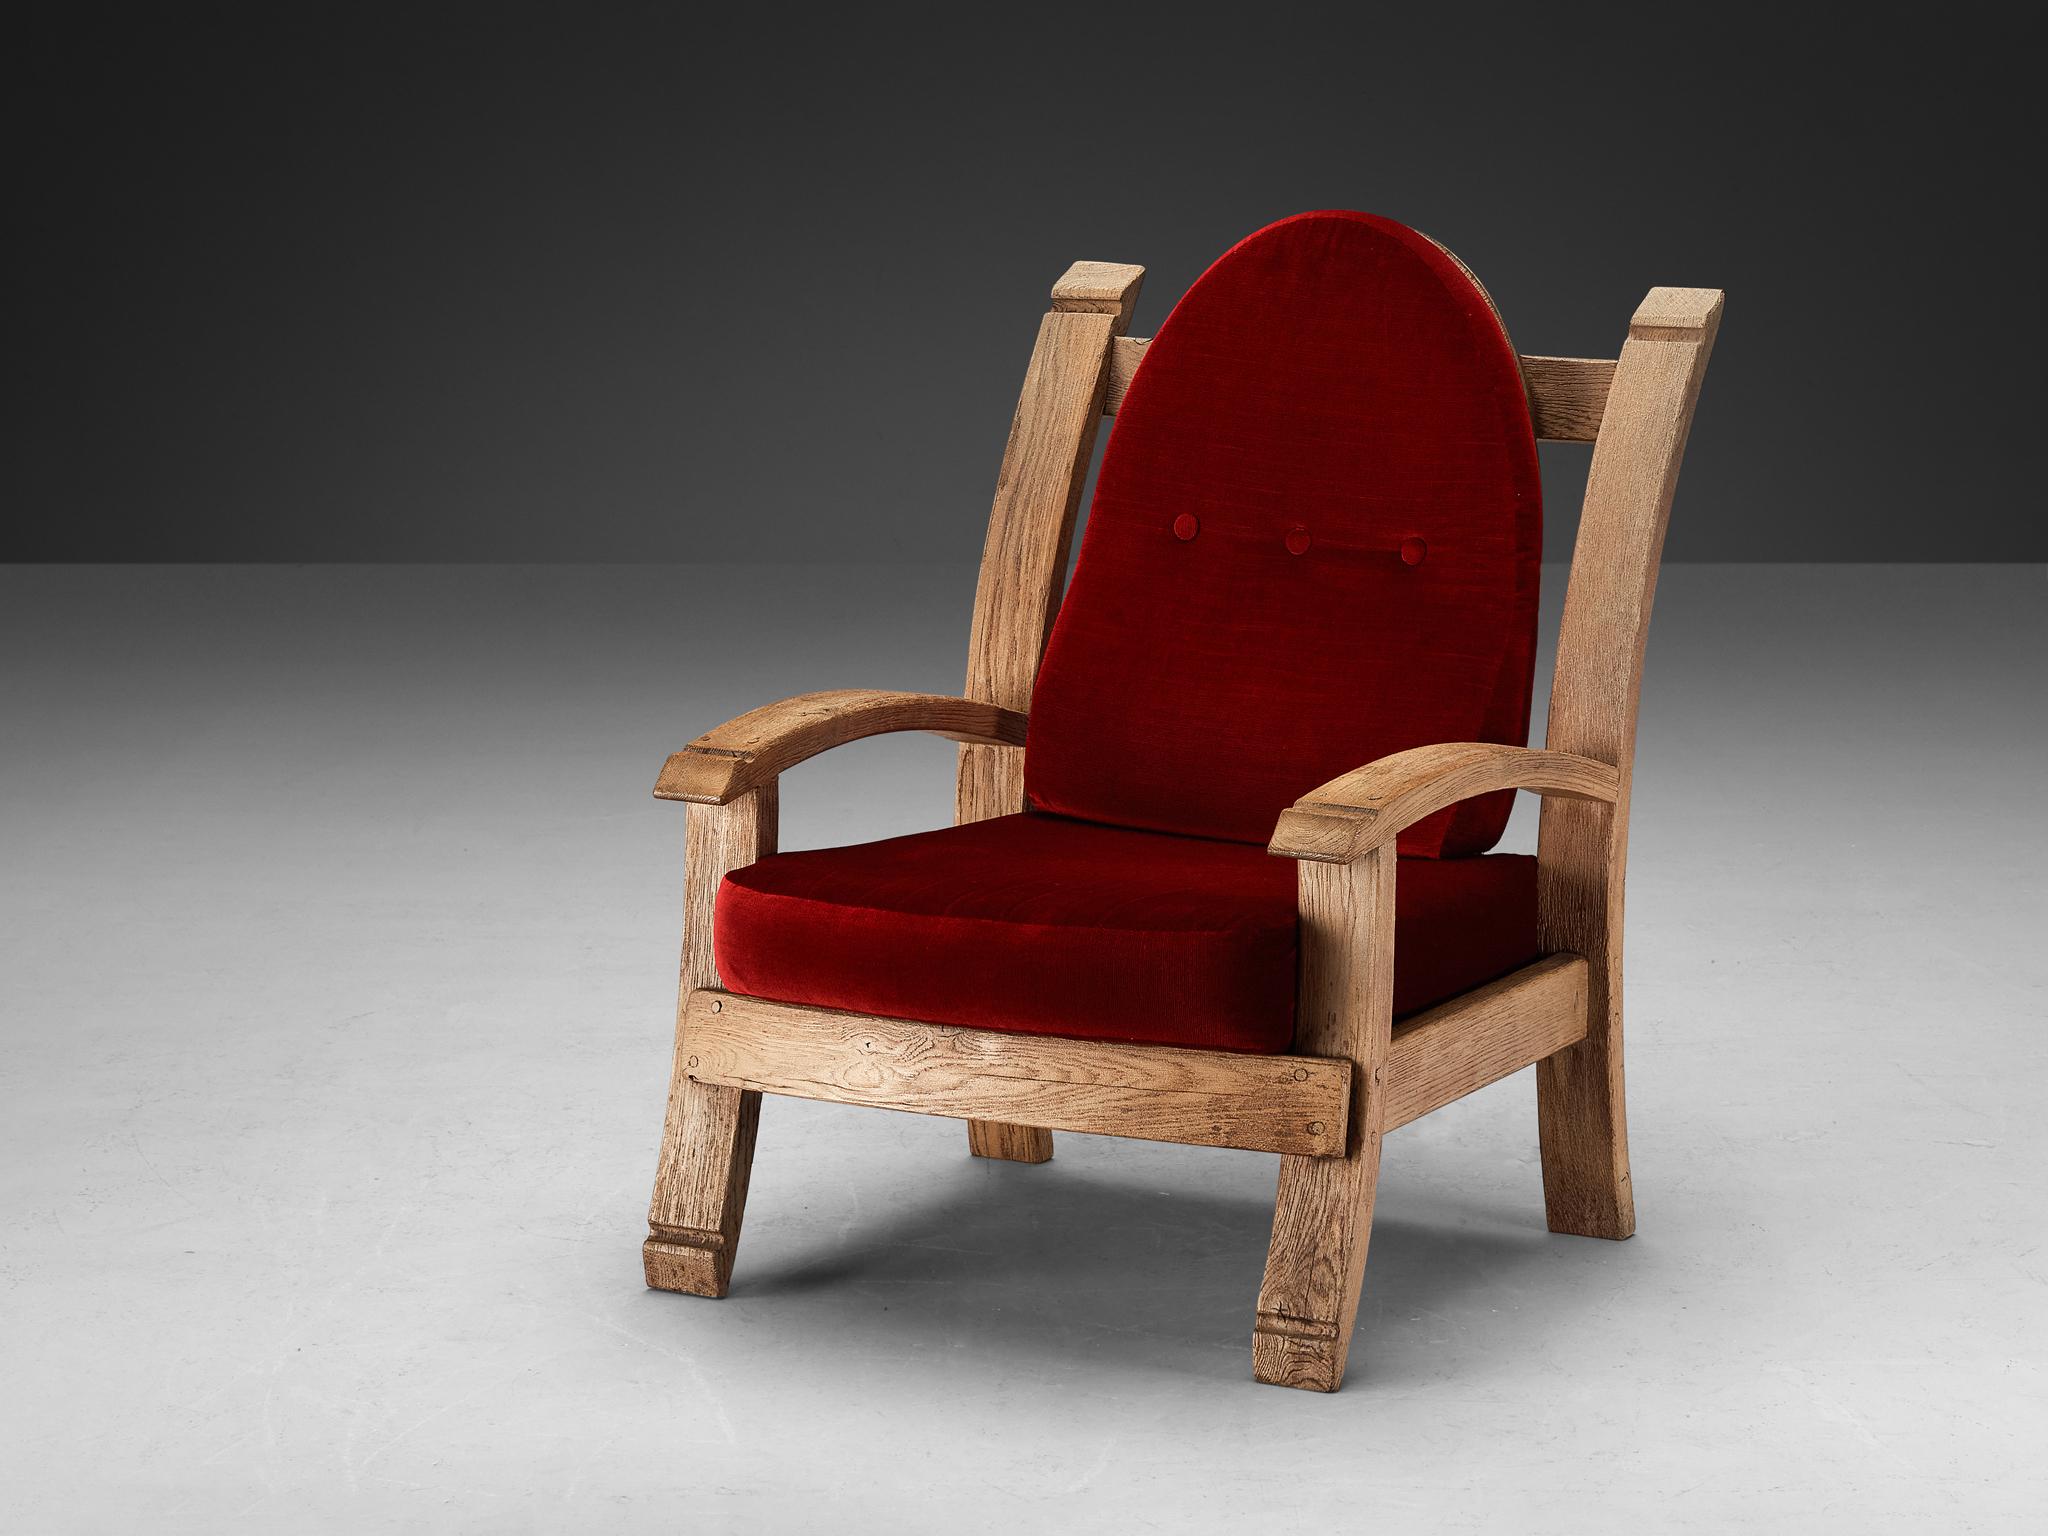 Lounge chair, oak, velvet, France, 1940s

Charming French Art Deco armchair made in oak. The design features bulky forms with with features that remind of a throne, such as the high, almost majestic backrests that slightly leans backwards. The arms